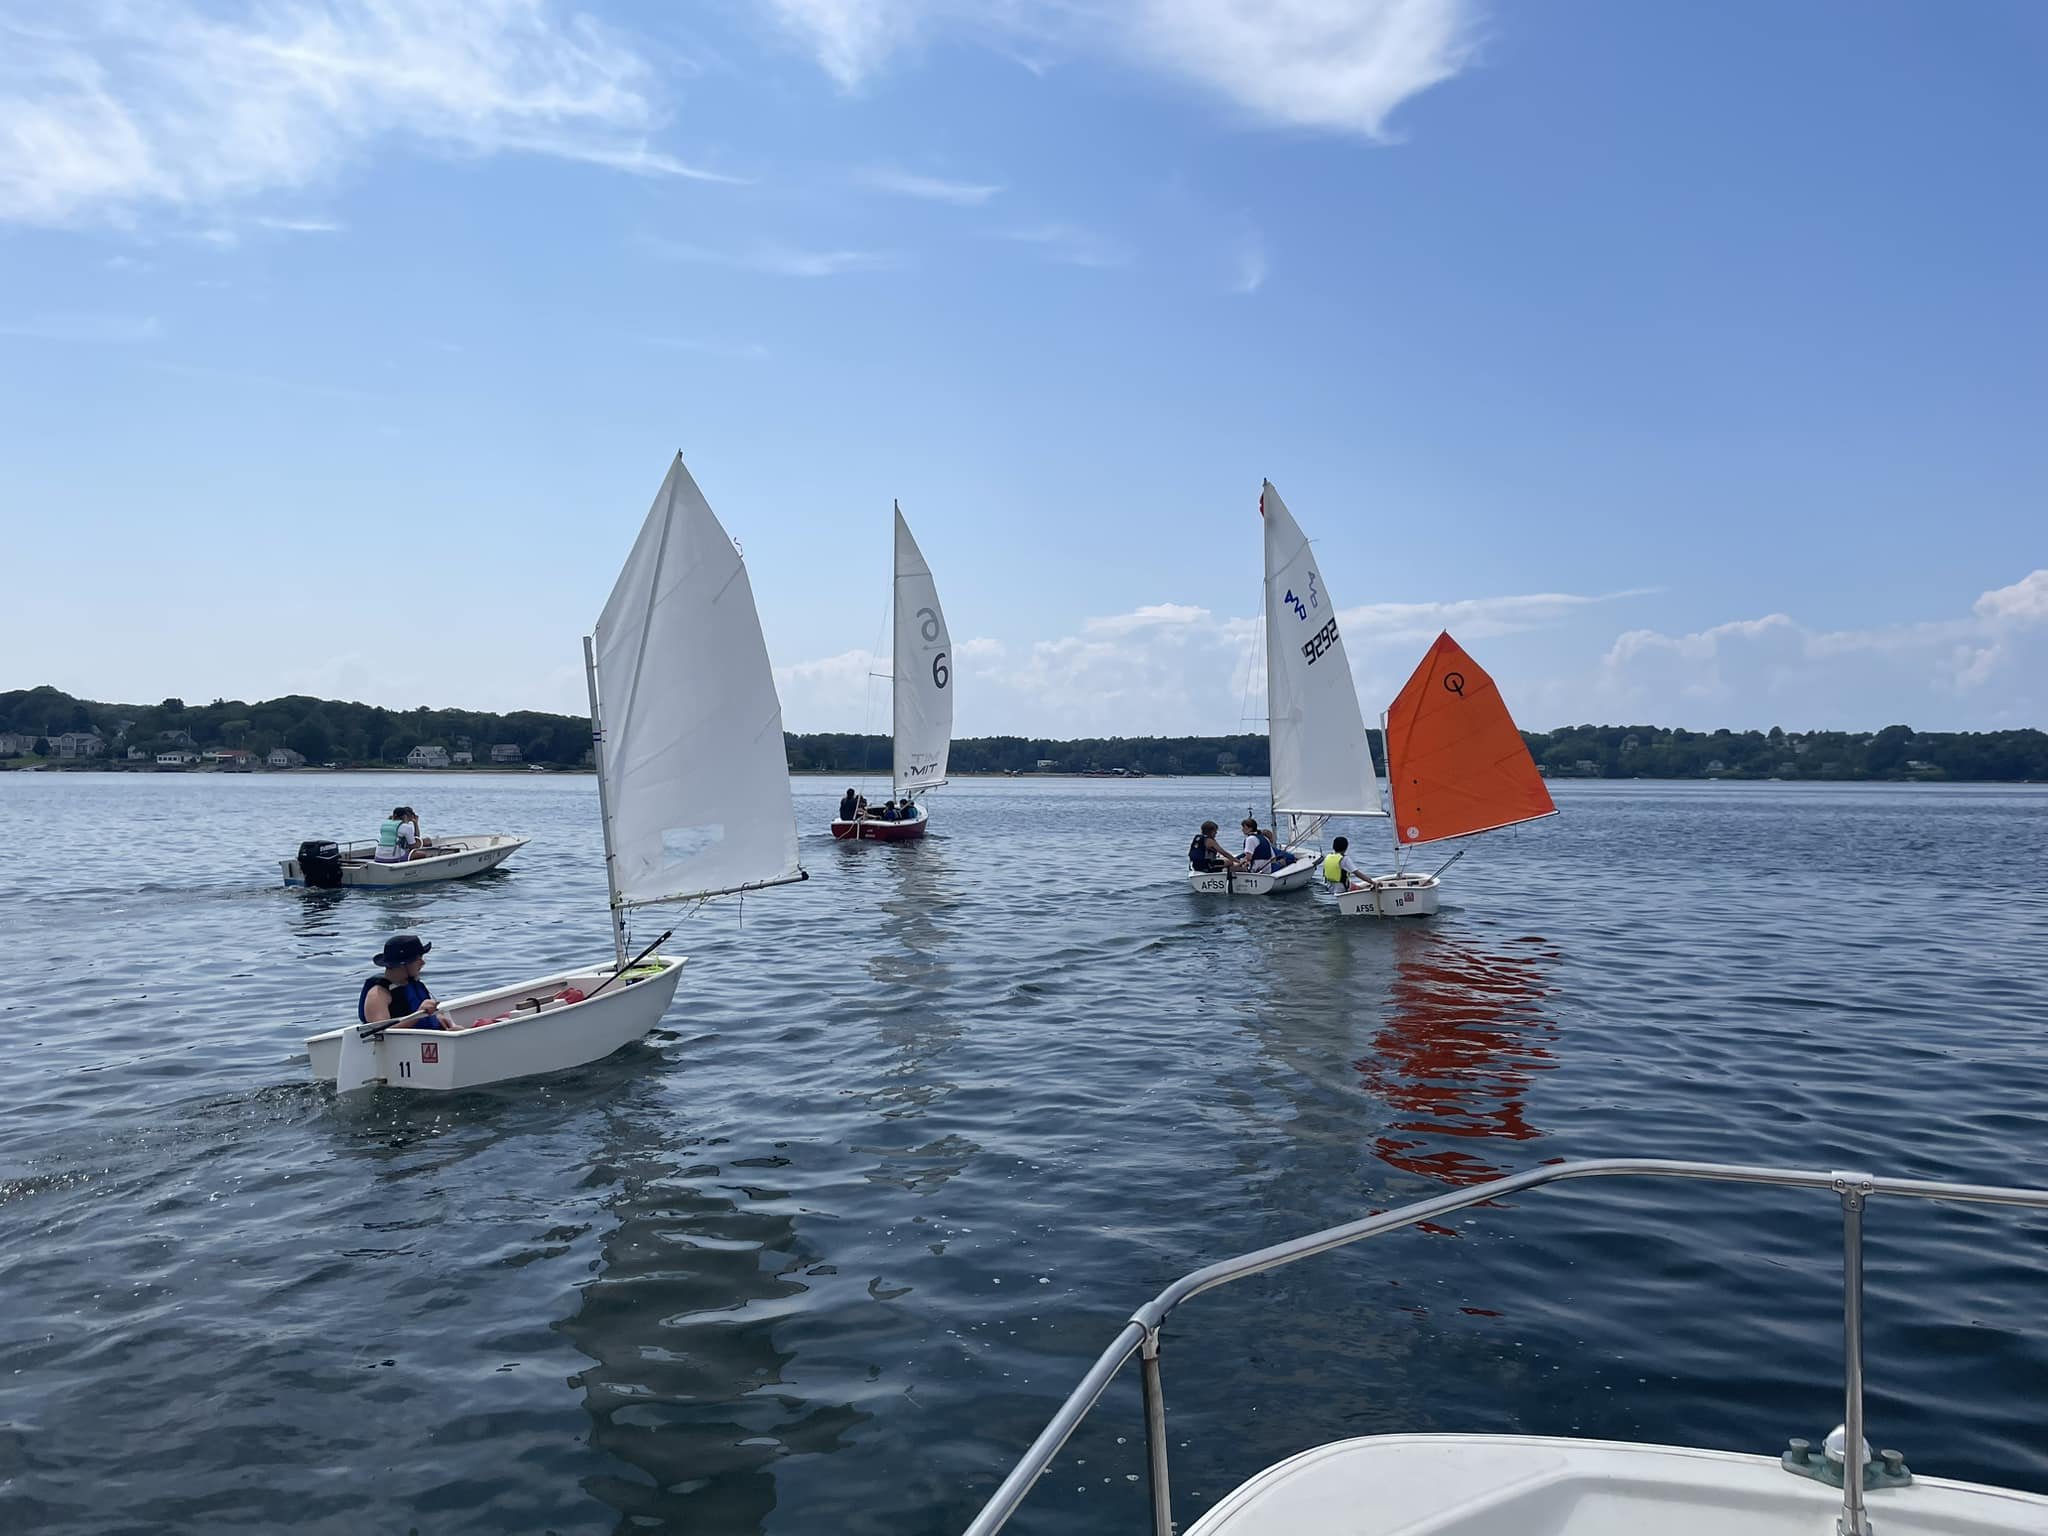 Sailing school? Yes, please!

We donated a gift card to Abbot Fletcher Sailing School's 2024 auction to support their sailing students. They provide beginner, intermediate and racing level instruction to youth and adults in the greater Bath-Brunswick